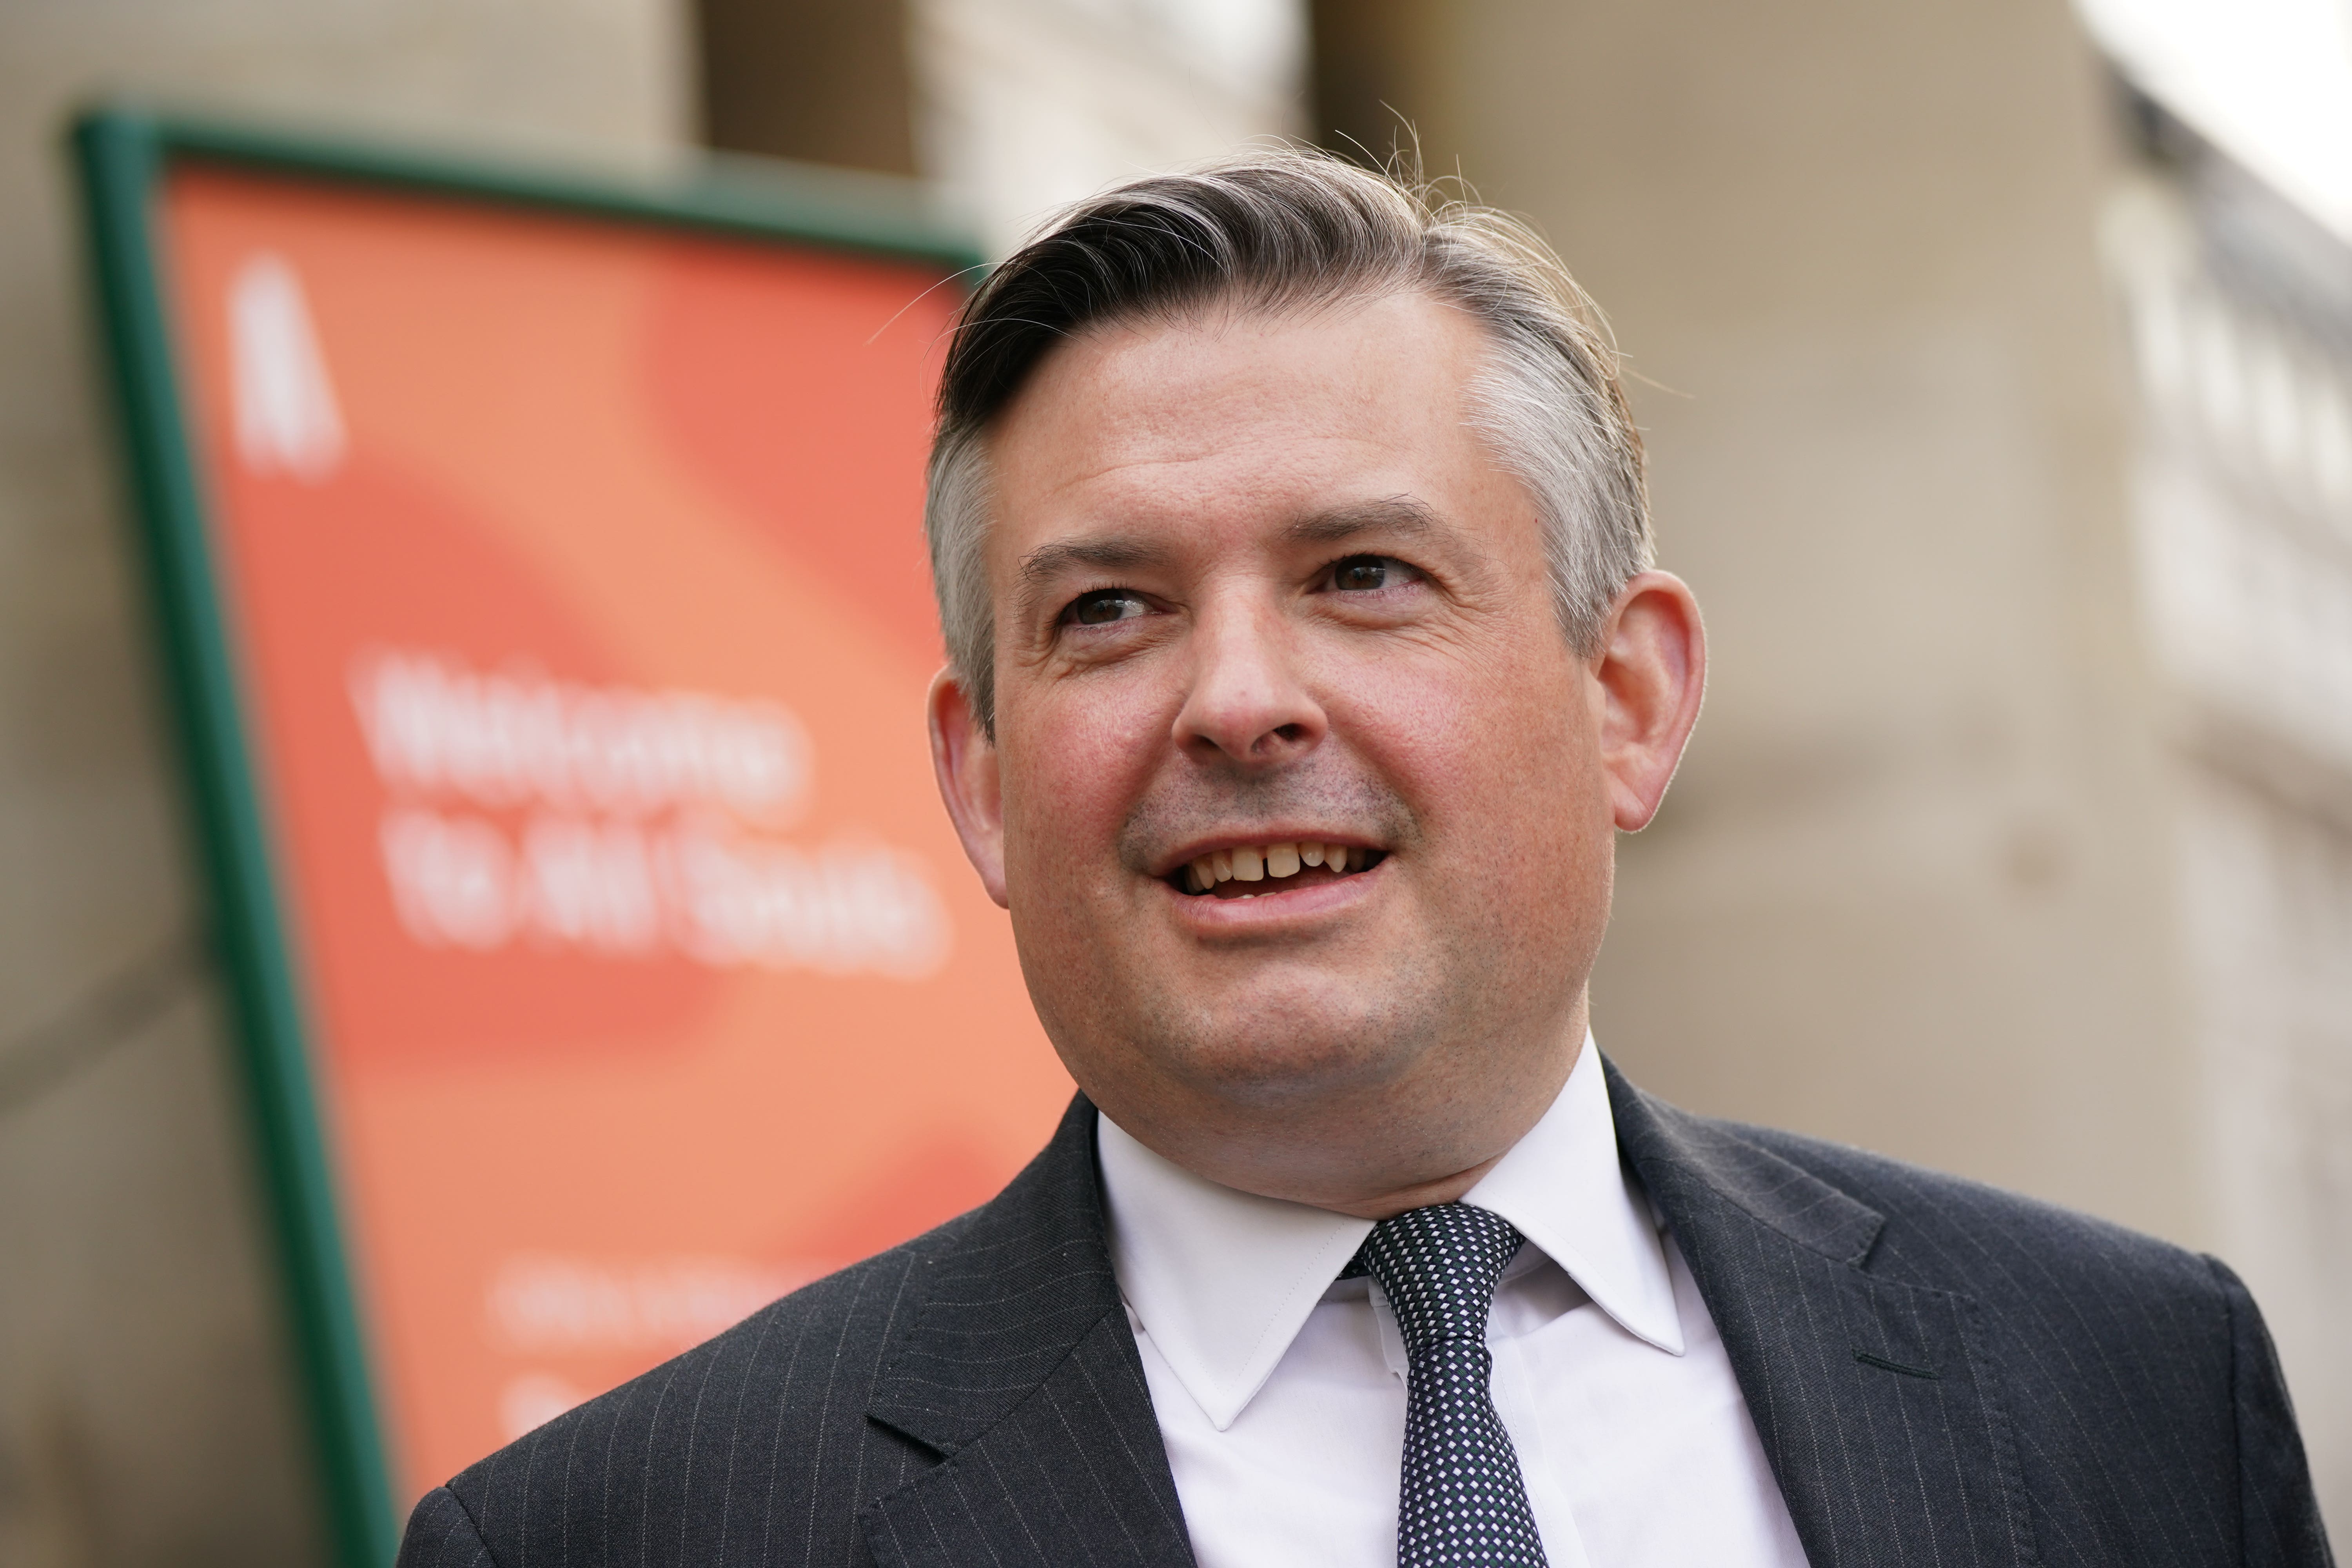 Jonathan Ashworth has made a public bet that the country would go to the polls in May